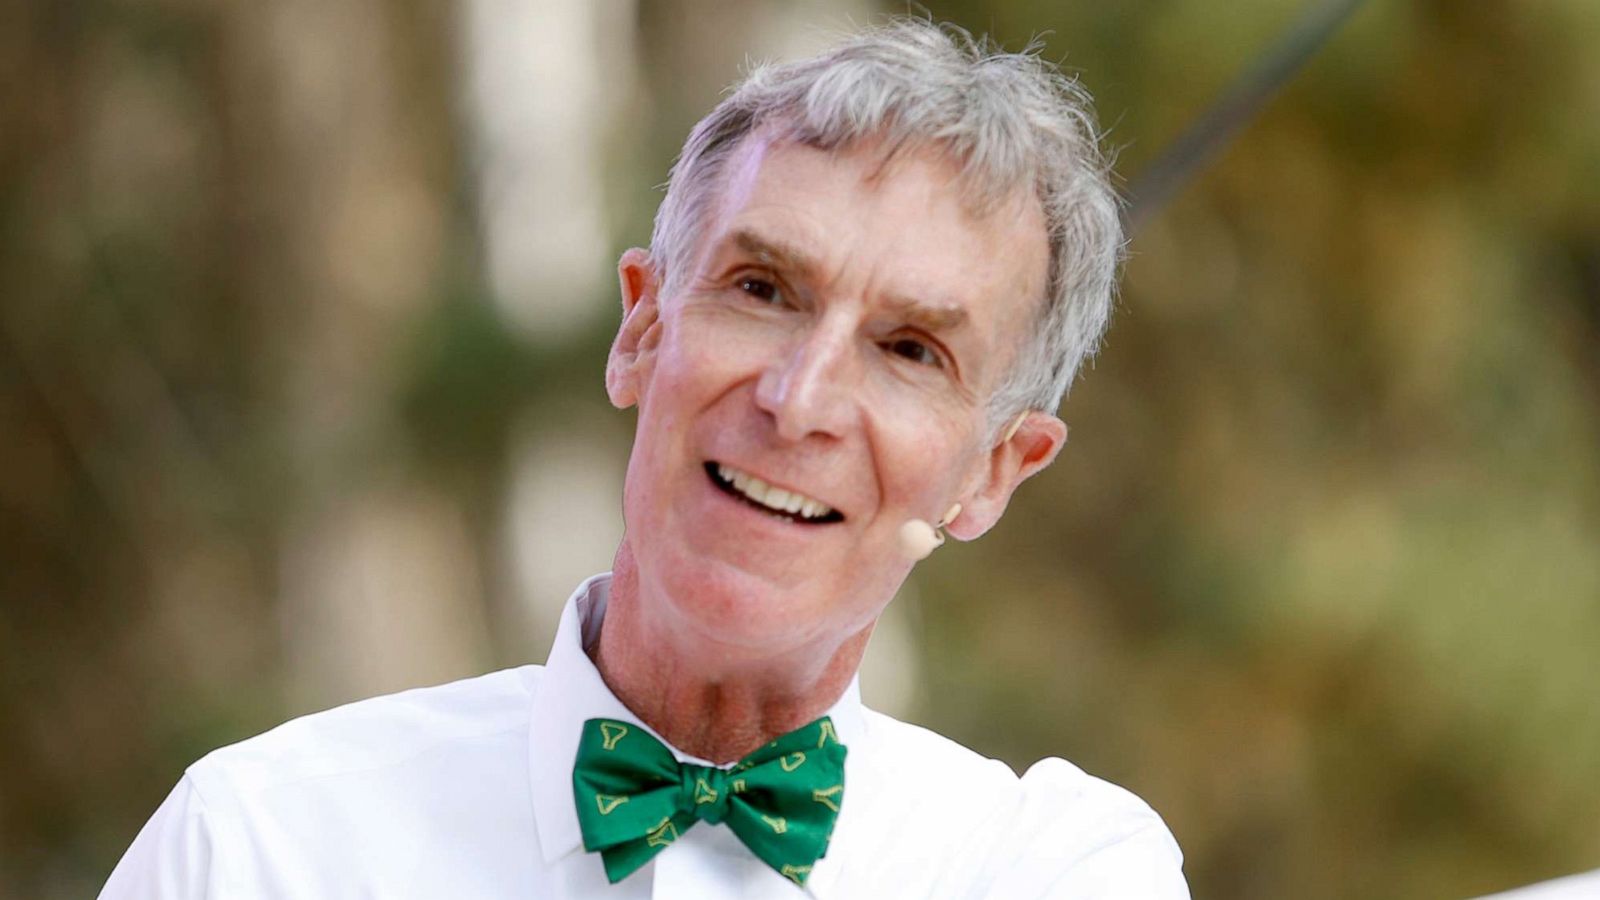 PHOTO: Bill Nye speaks at an Arts Festival at Golden Gate Park, Aug. 10, 2018 in San Francisco.